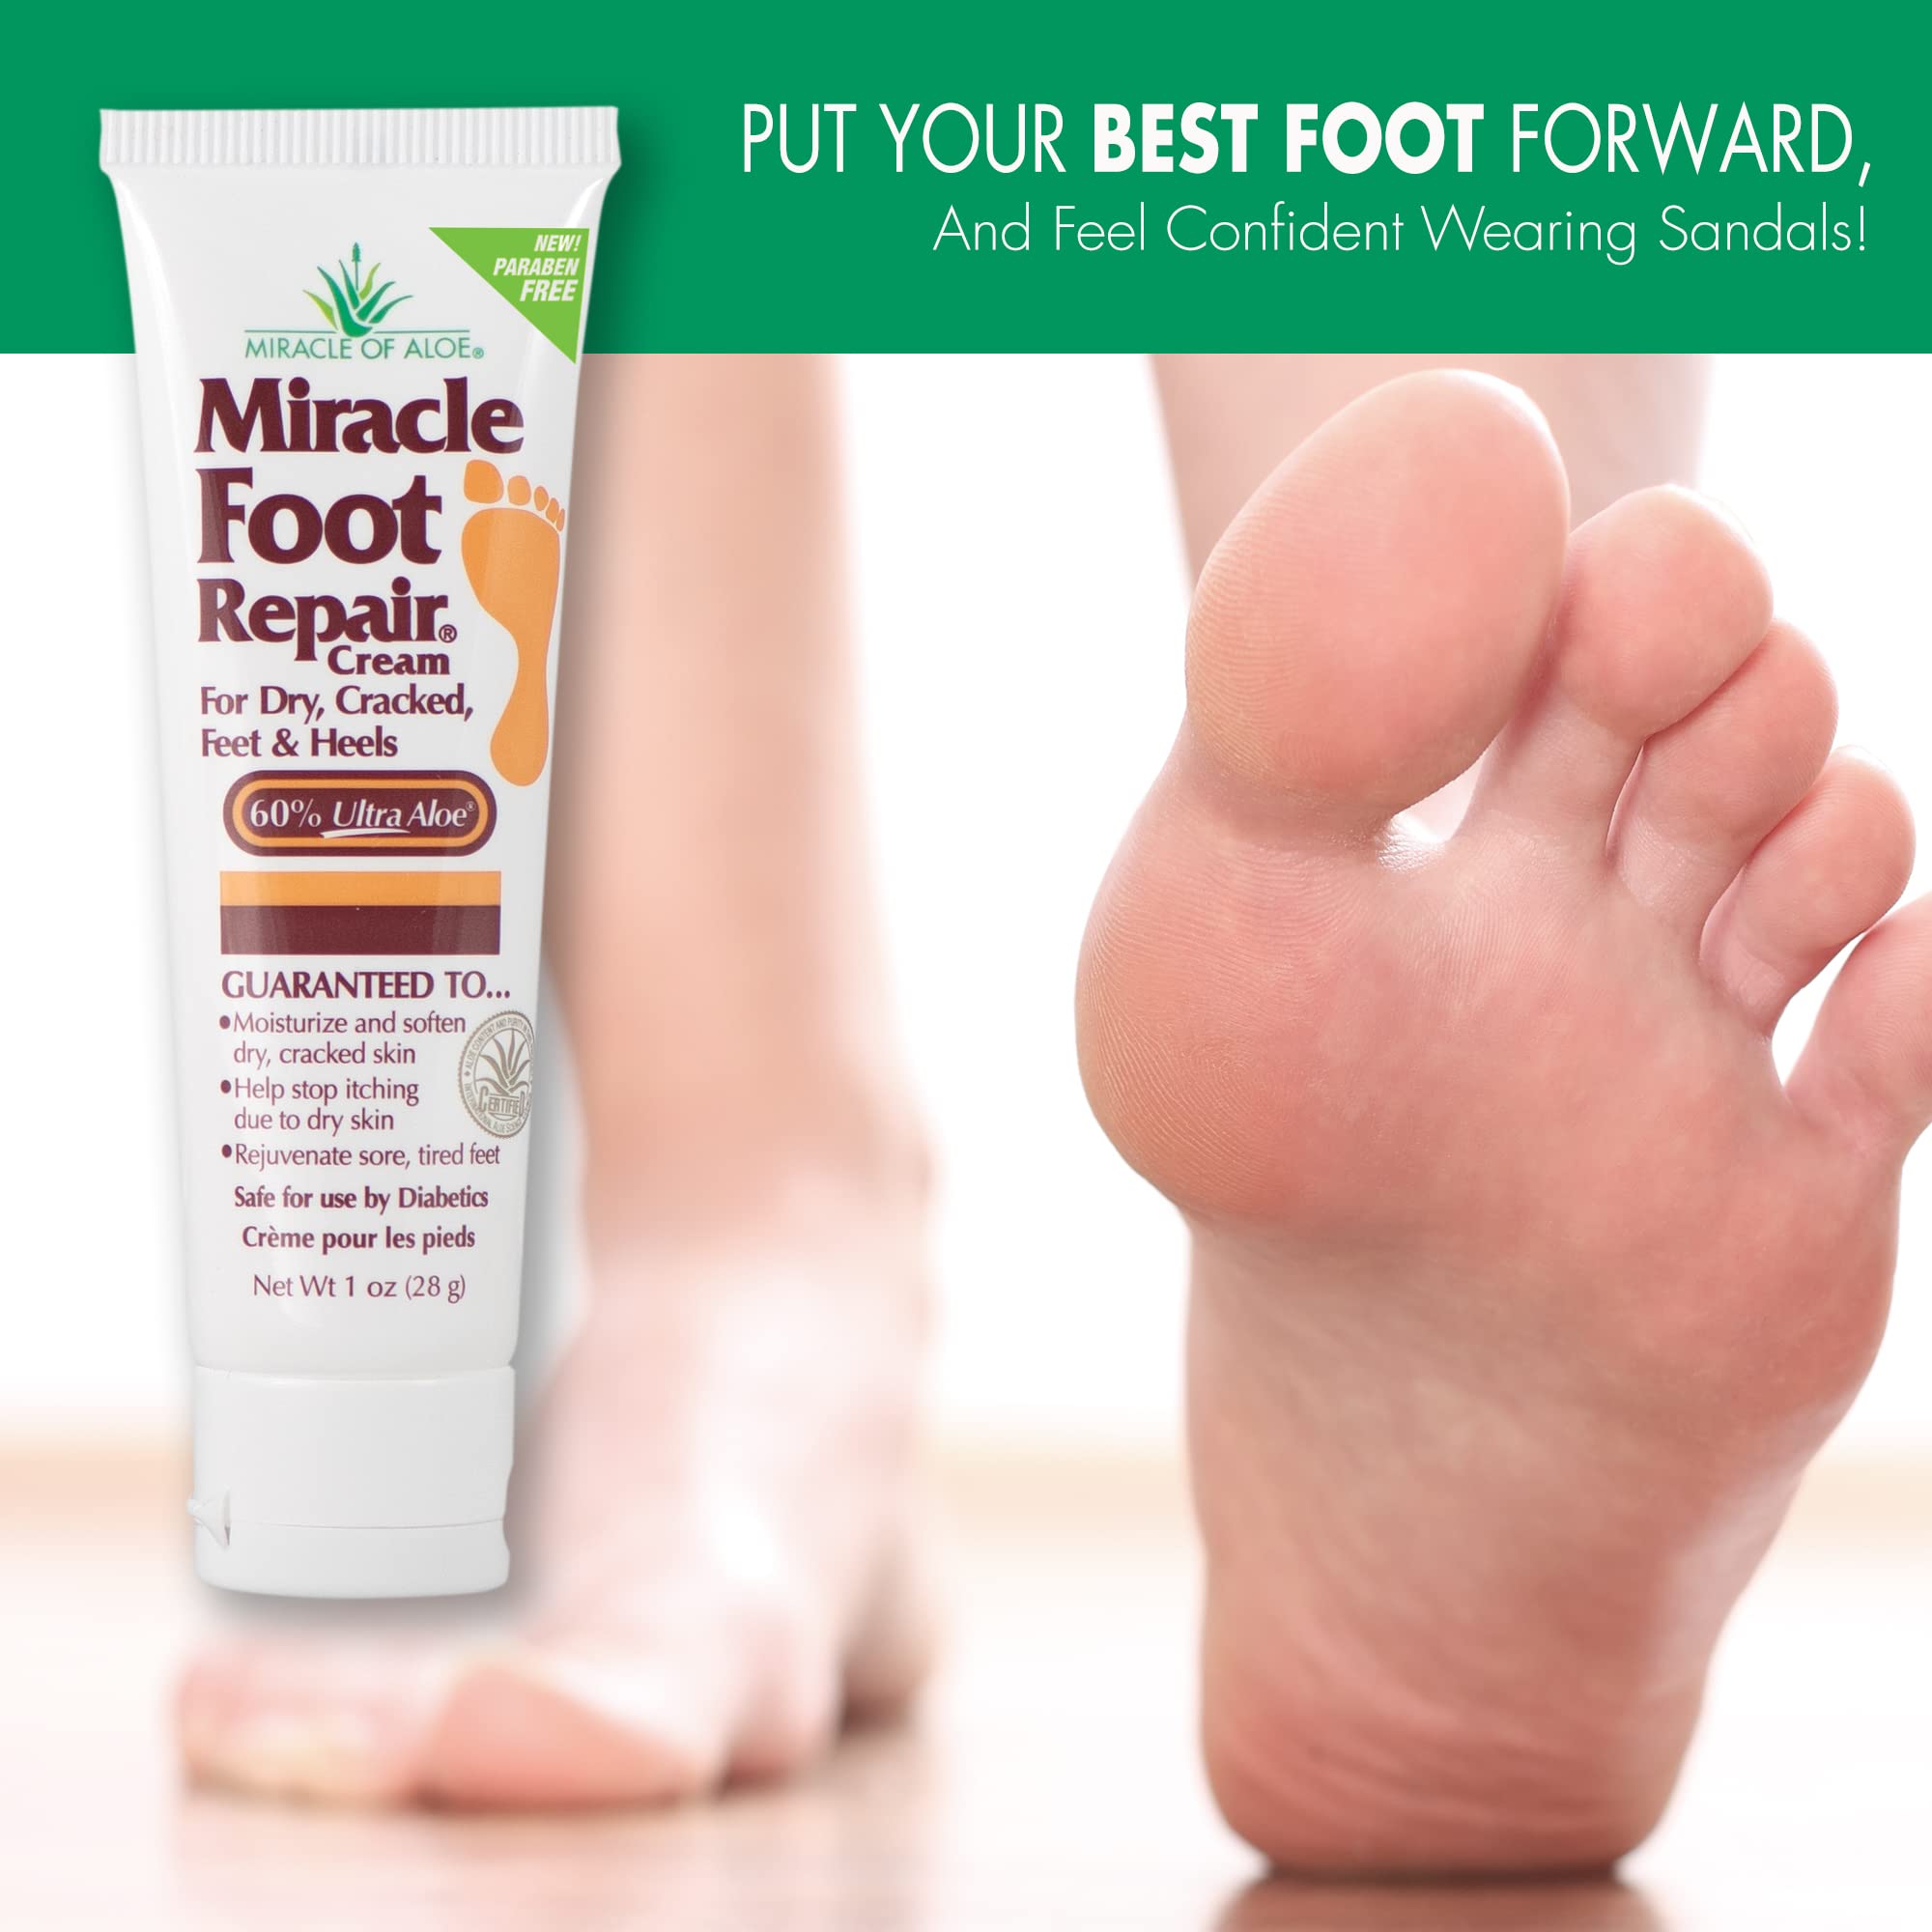 Miracle Foot Repair Cream | 1 Ounce Tube (3) | Fast Relief for Dry, Cracked, Itchy Feet and Heels | Moisturizes | Softens | Restores Comfort | Stops Nasty Odor | Diabetic-Safe